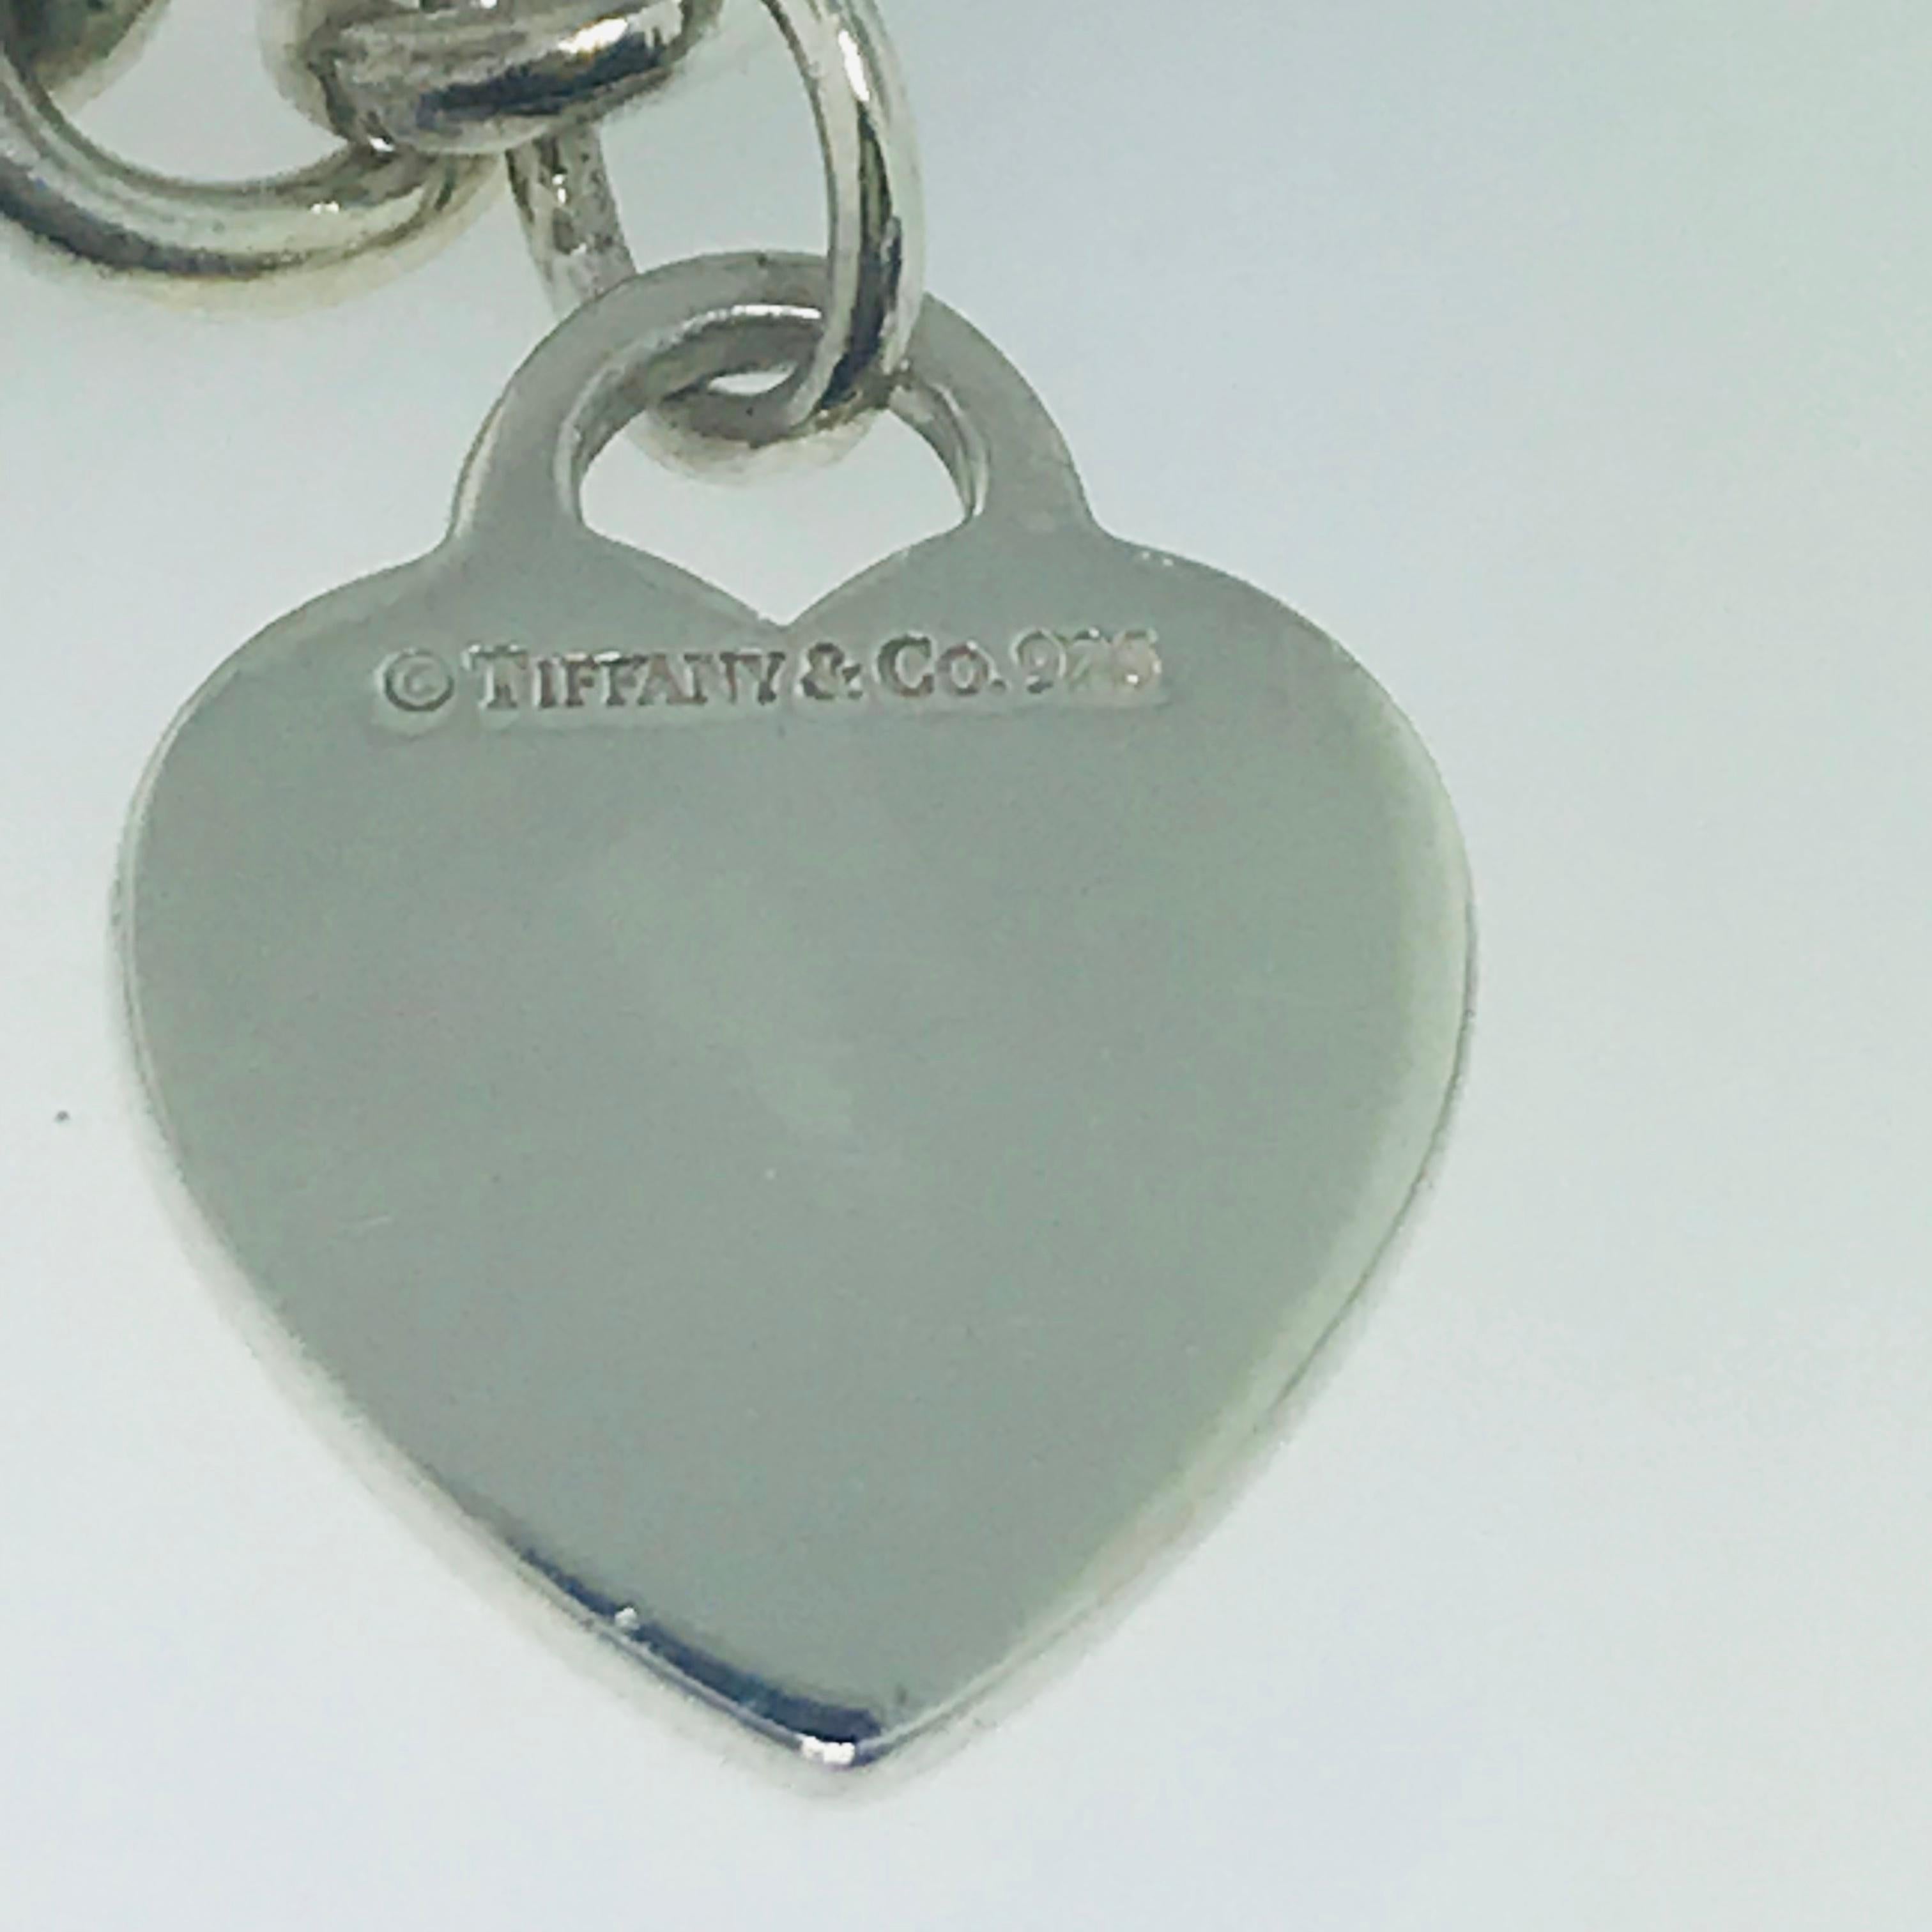 Tiffany & Co. Charm Bracelet with Heart Charm in Sterling Silver 1